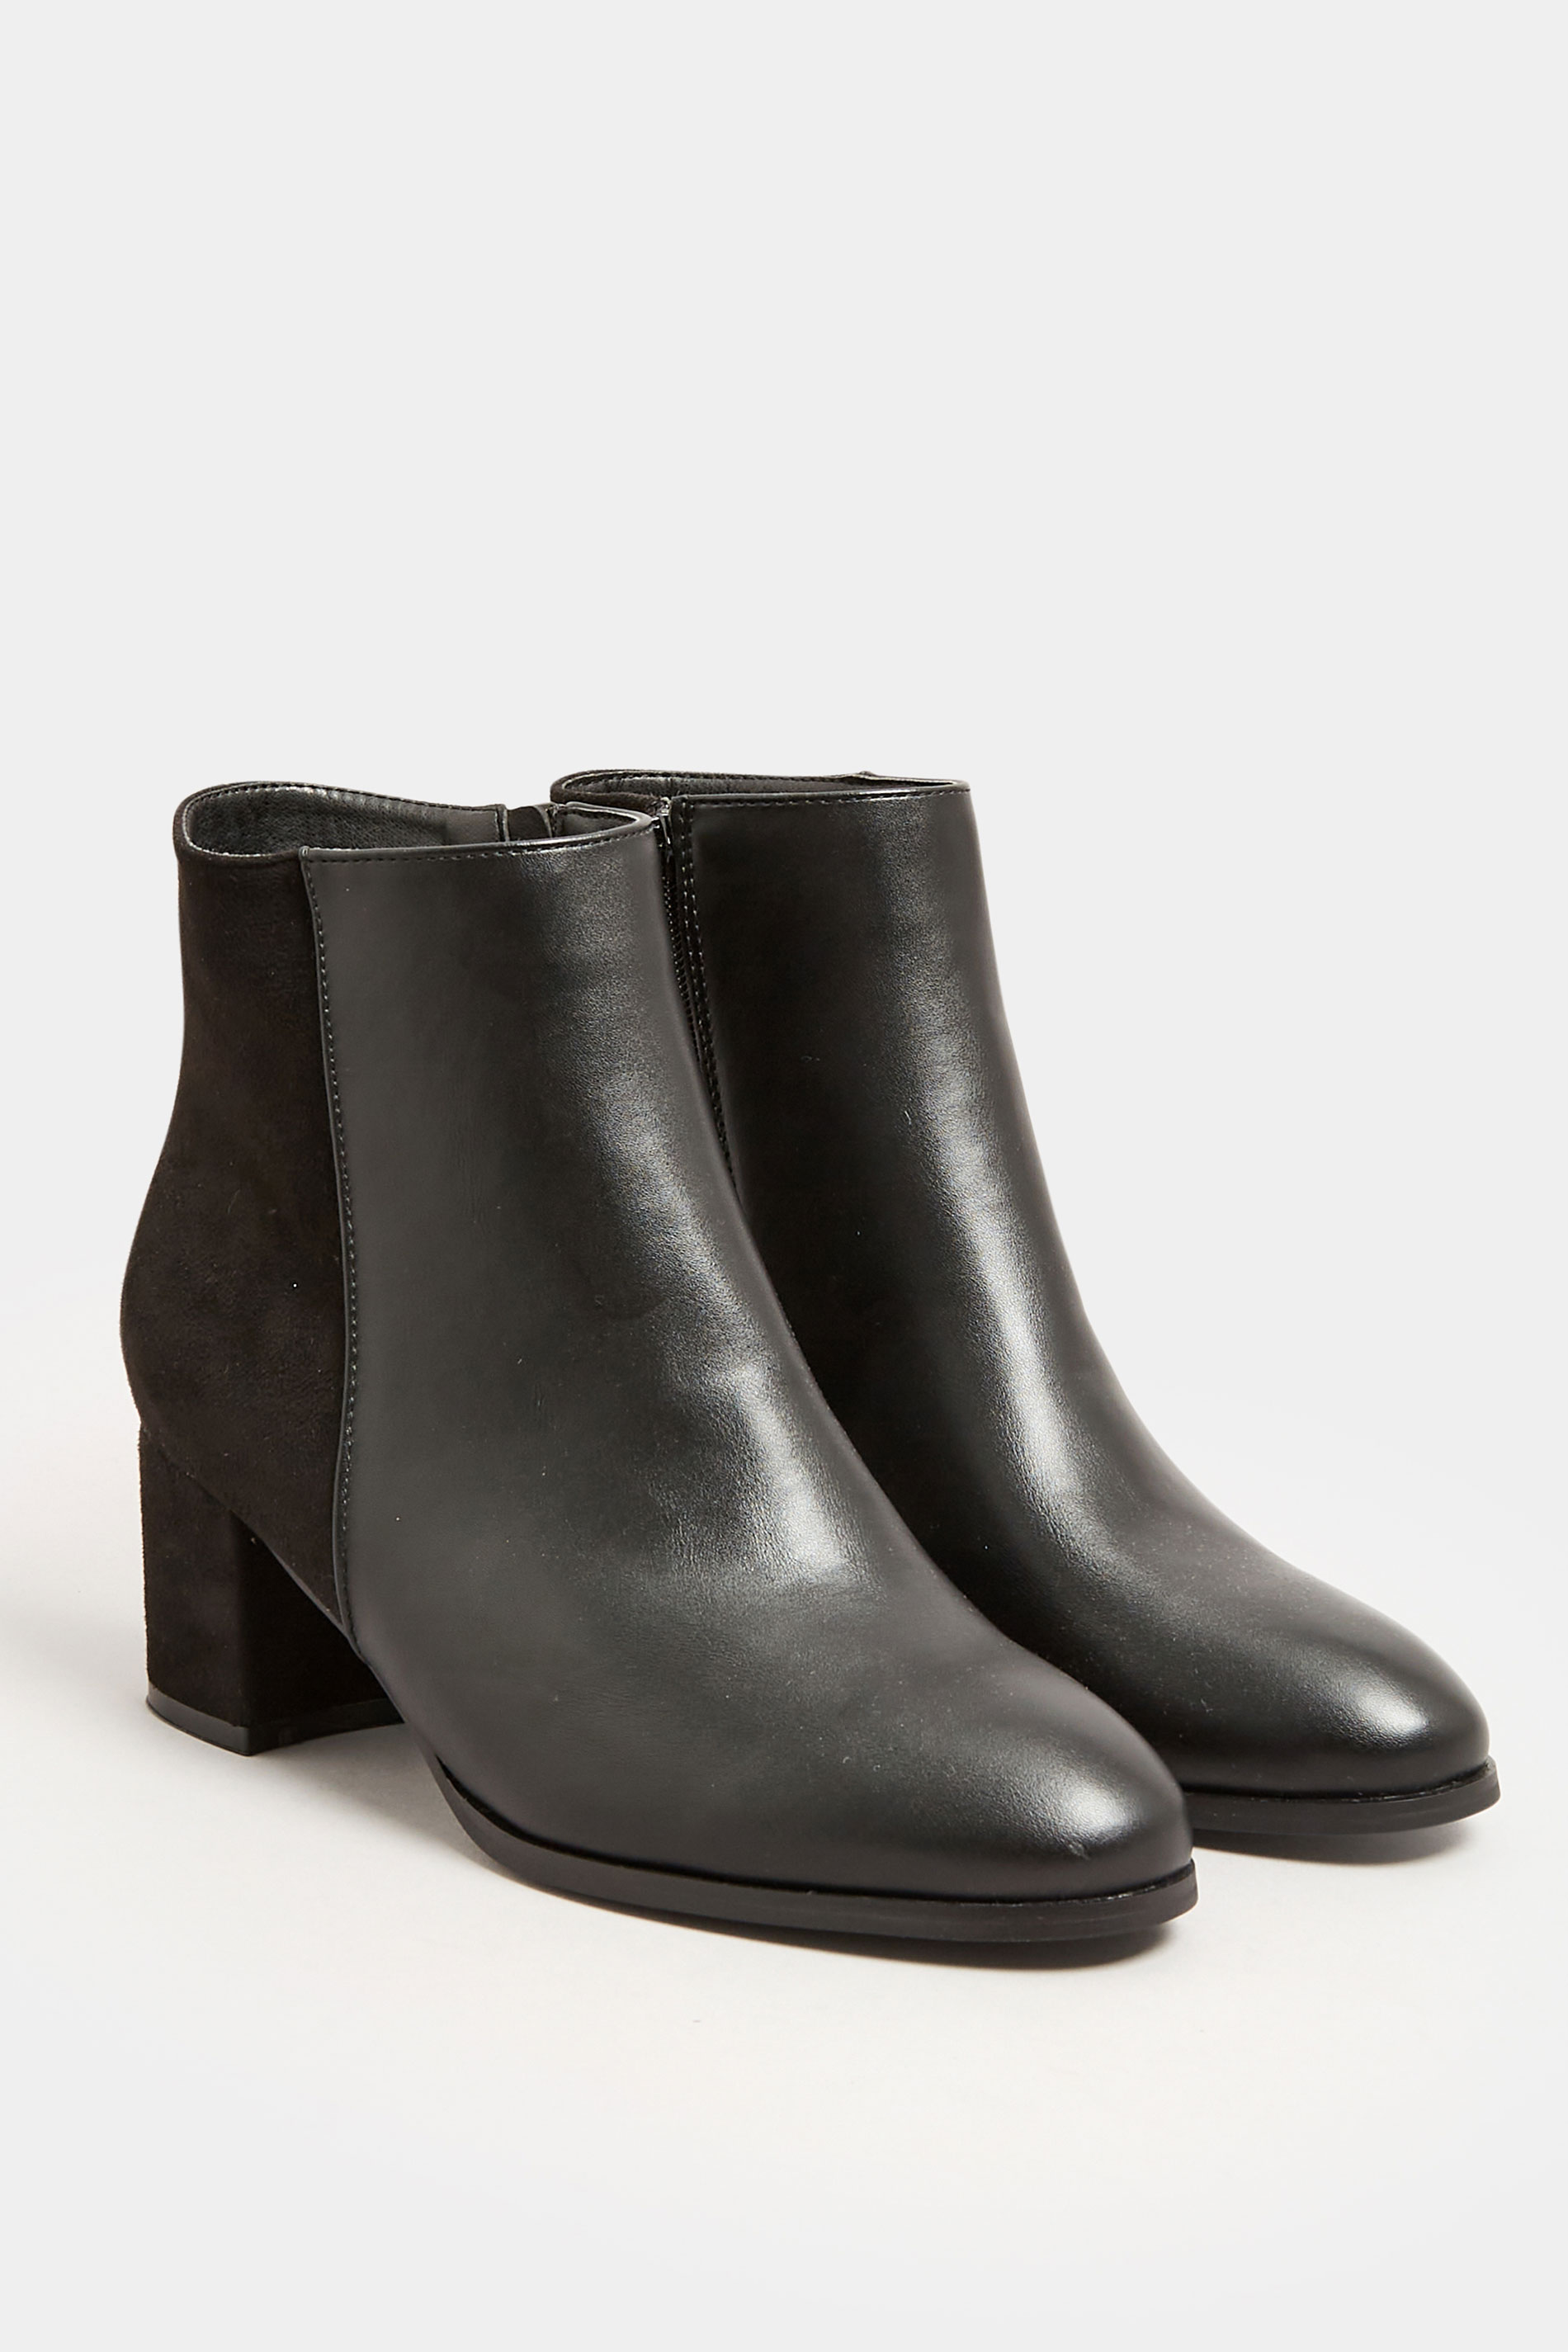 Black Faux Leather Heeled Ankle Boots in E Fit & EEE Fit 2